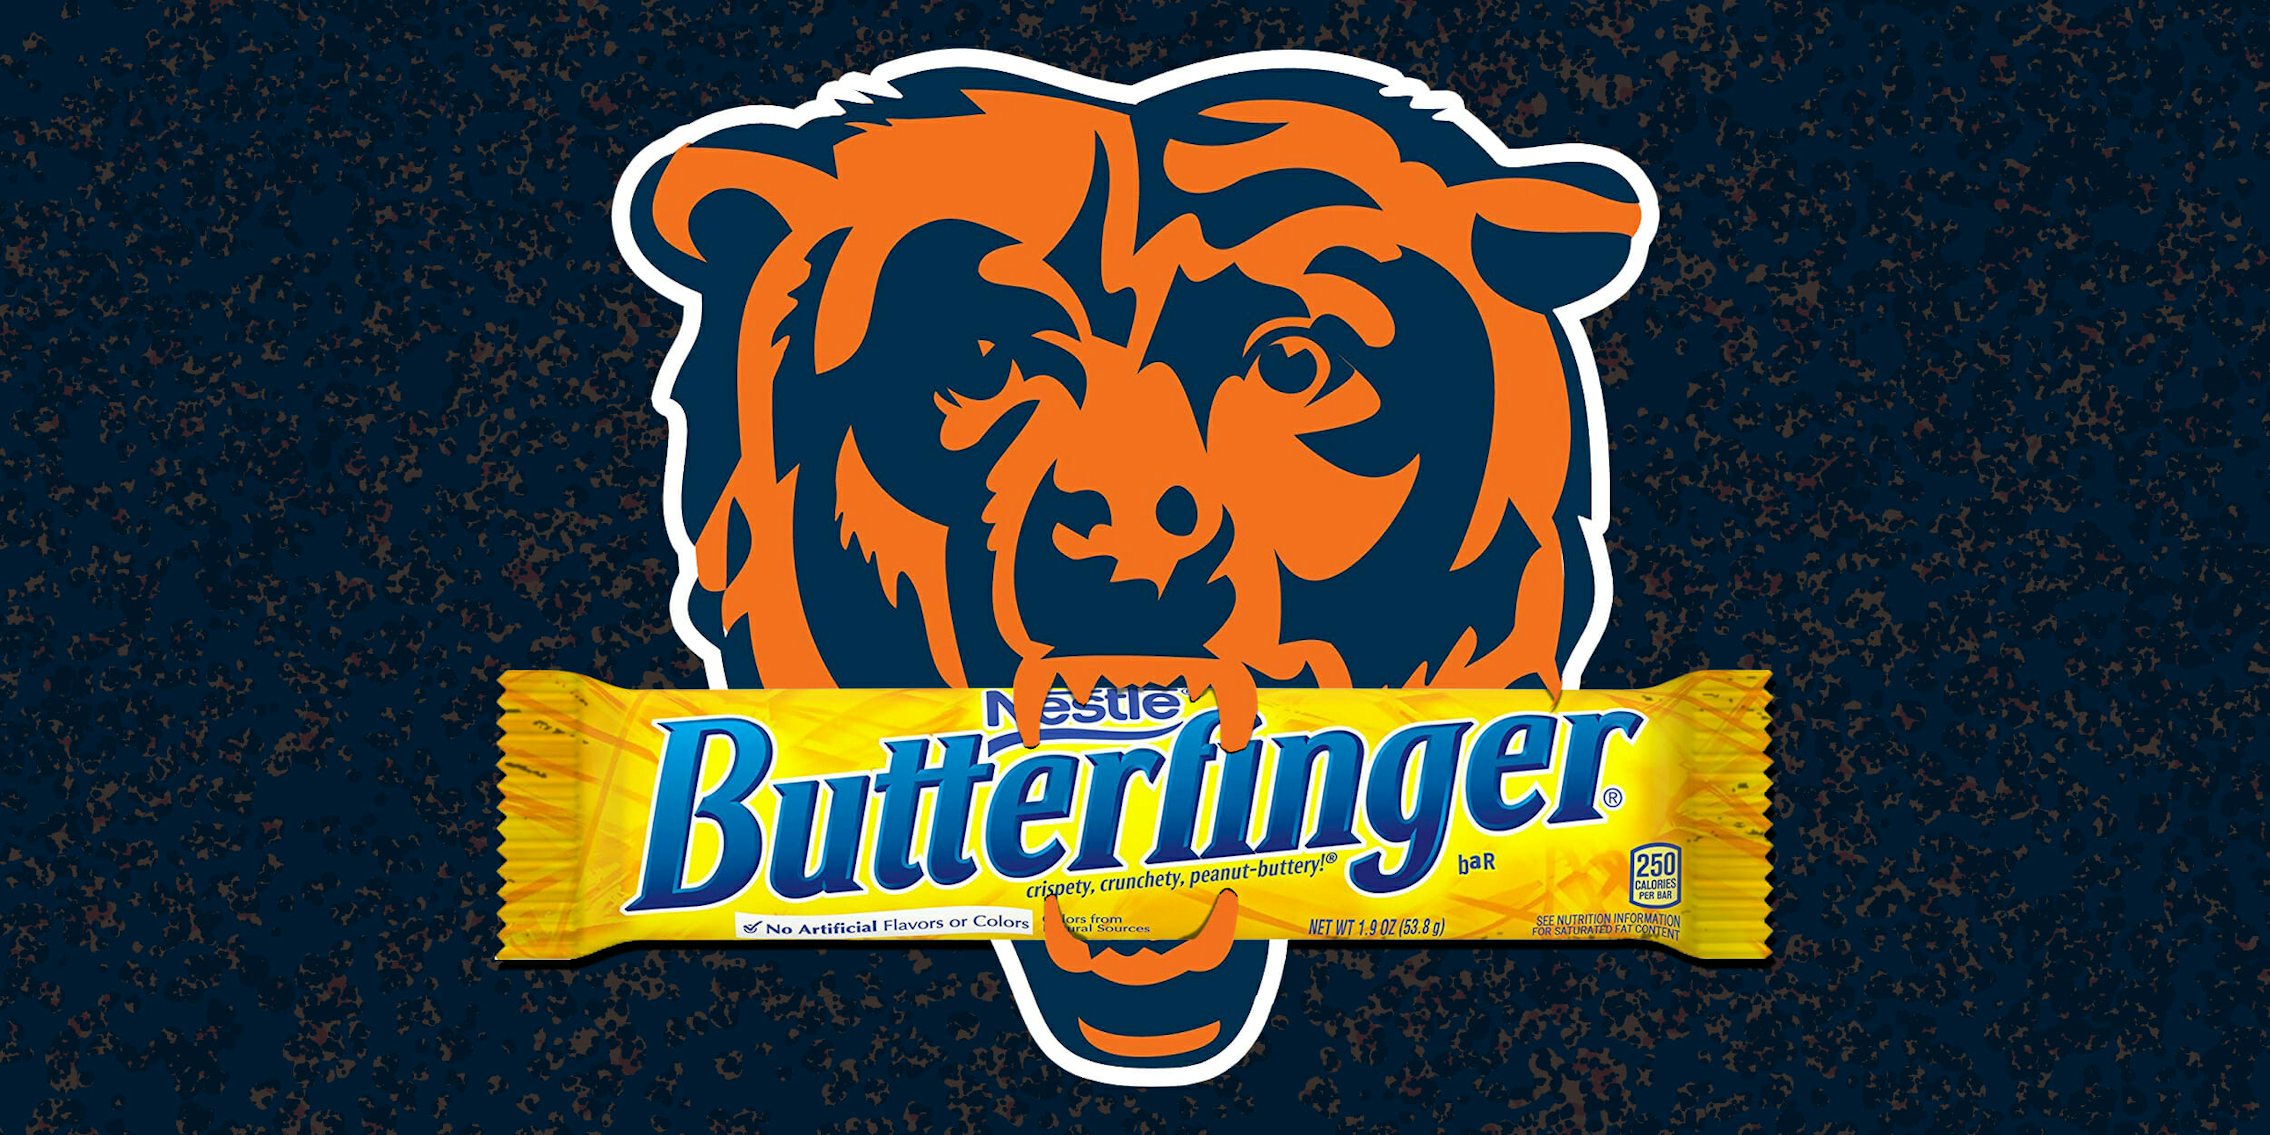 Chicago Bears logo holding Butterfinger bar in its mouth